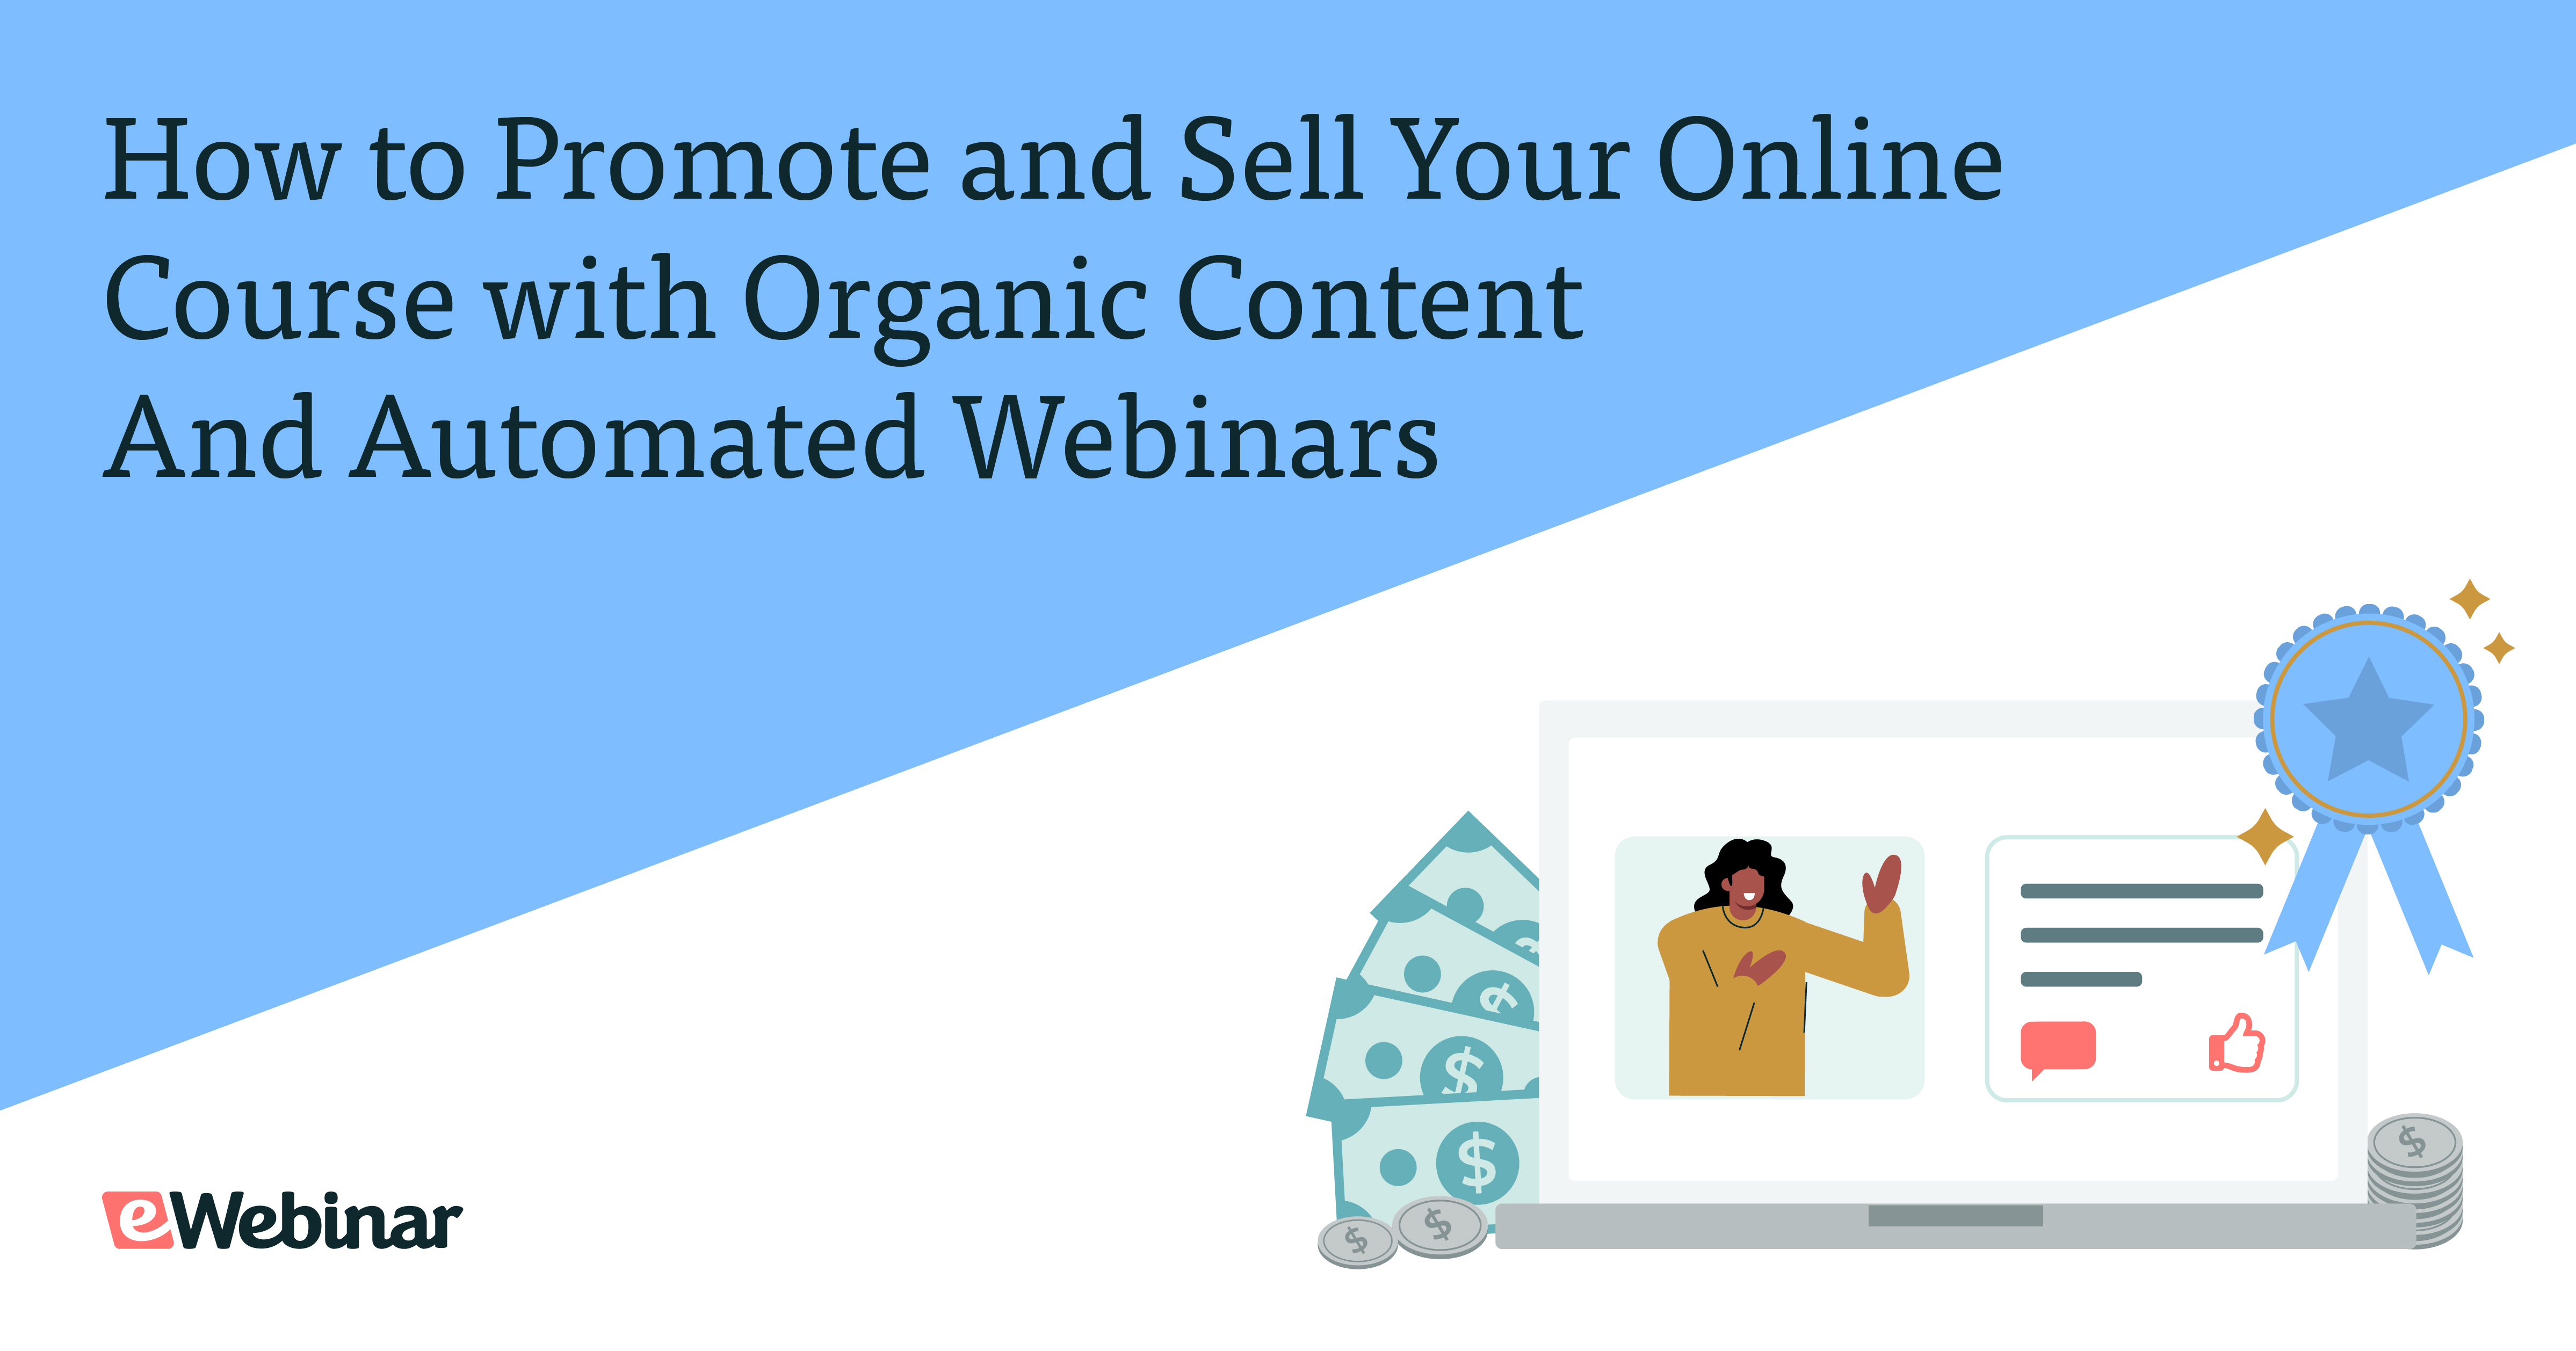 How to Promote and Sell Your Online Course with Organic Content and Automated Webinars